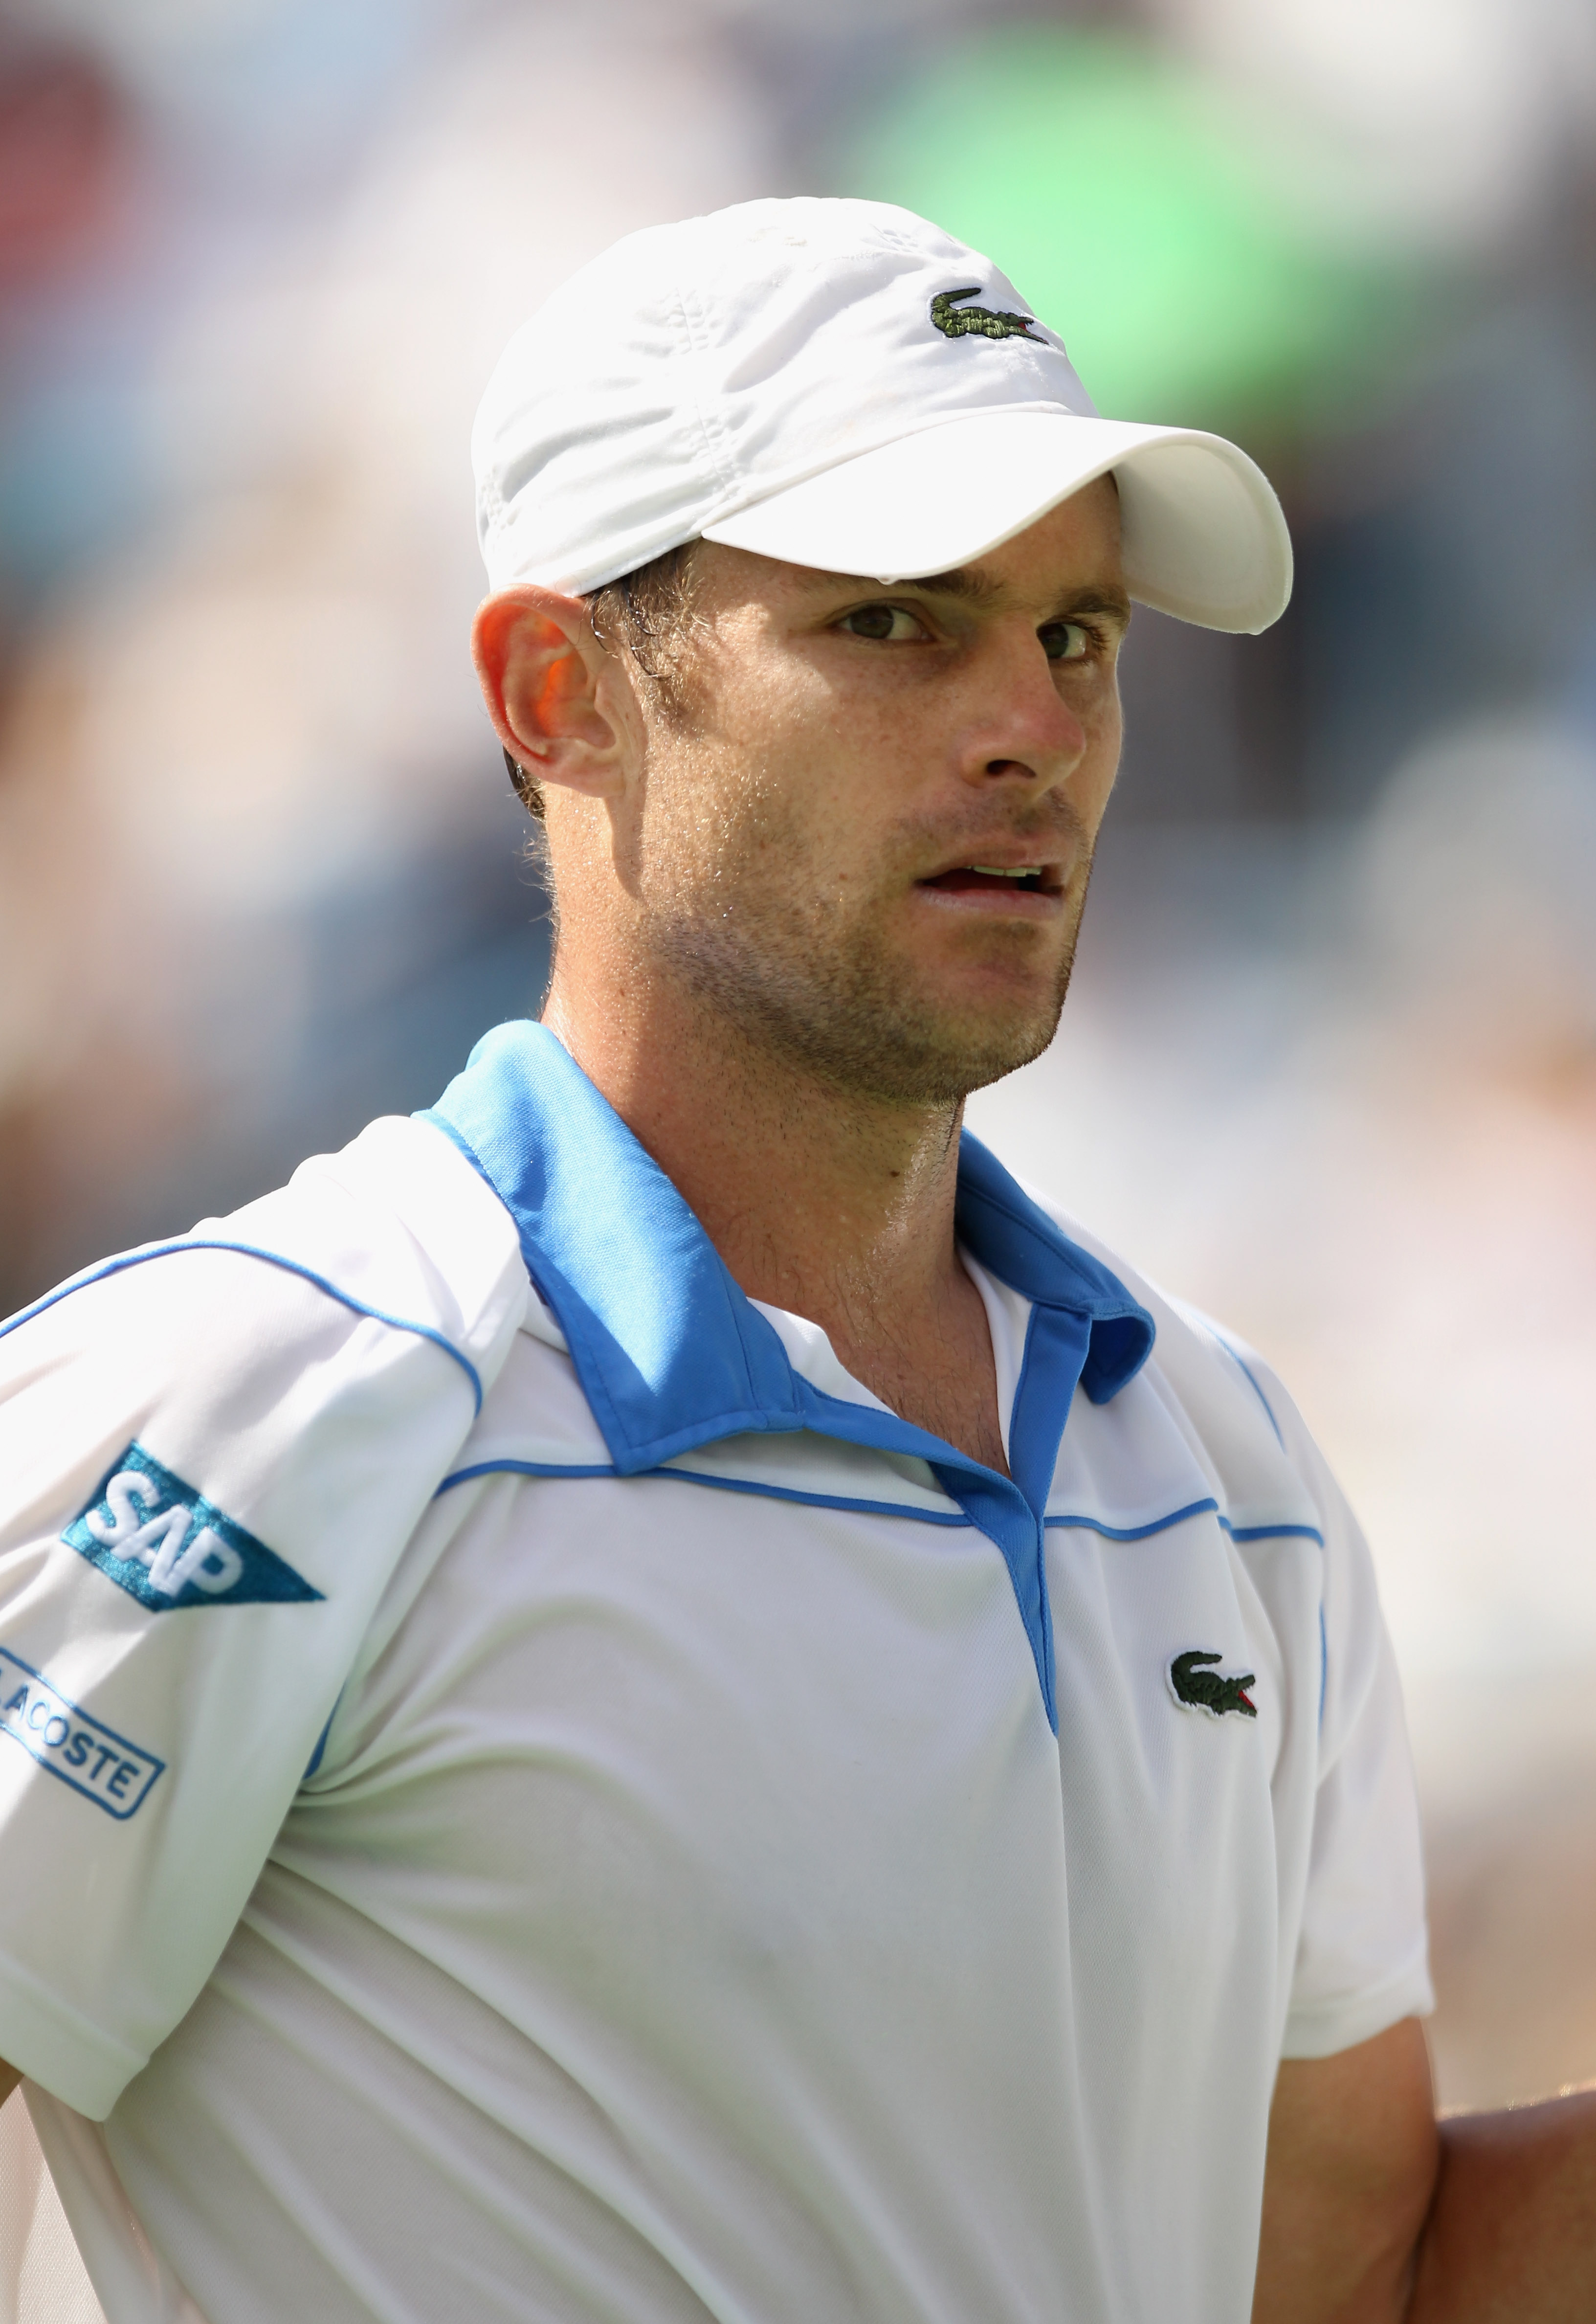 INDIAN WELLS, CA - MARCH 13:  Andy Roddick of the USA looks to his player's corner during his match against James Blake of the USA during the BNP Paribas Open at the Indian Wells Tennis Garden on March 13, 2011 in Indian Wells, California.  (Photo by Ezra